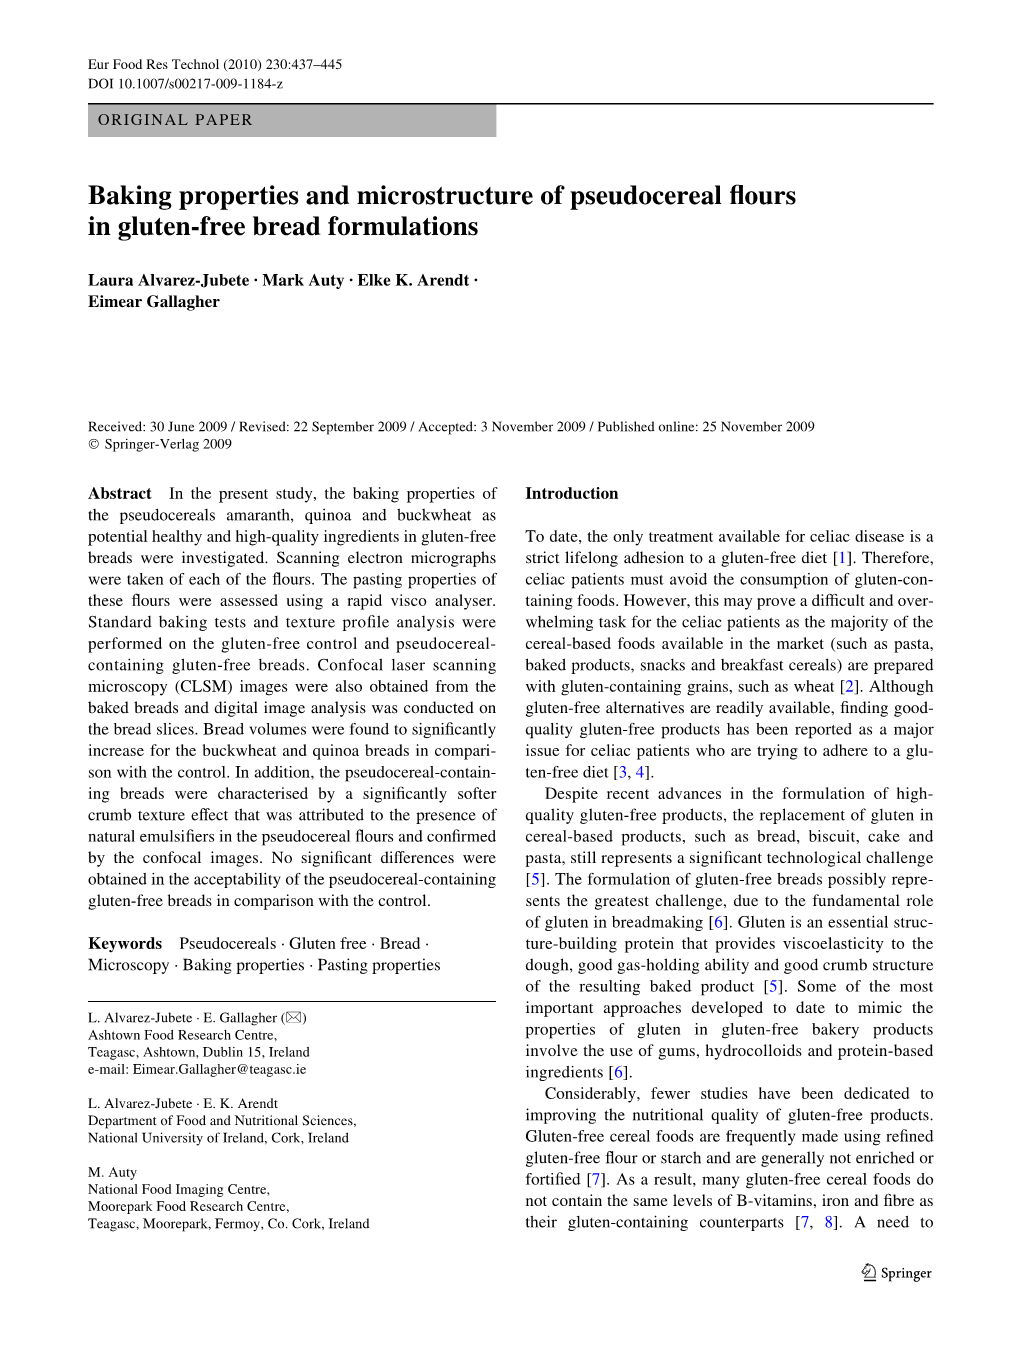 Baking Properties and Microstructure of Pseudocereal Xours in Gluten-Free Bread Formulations